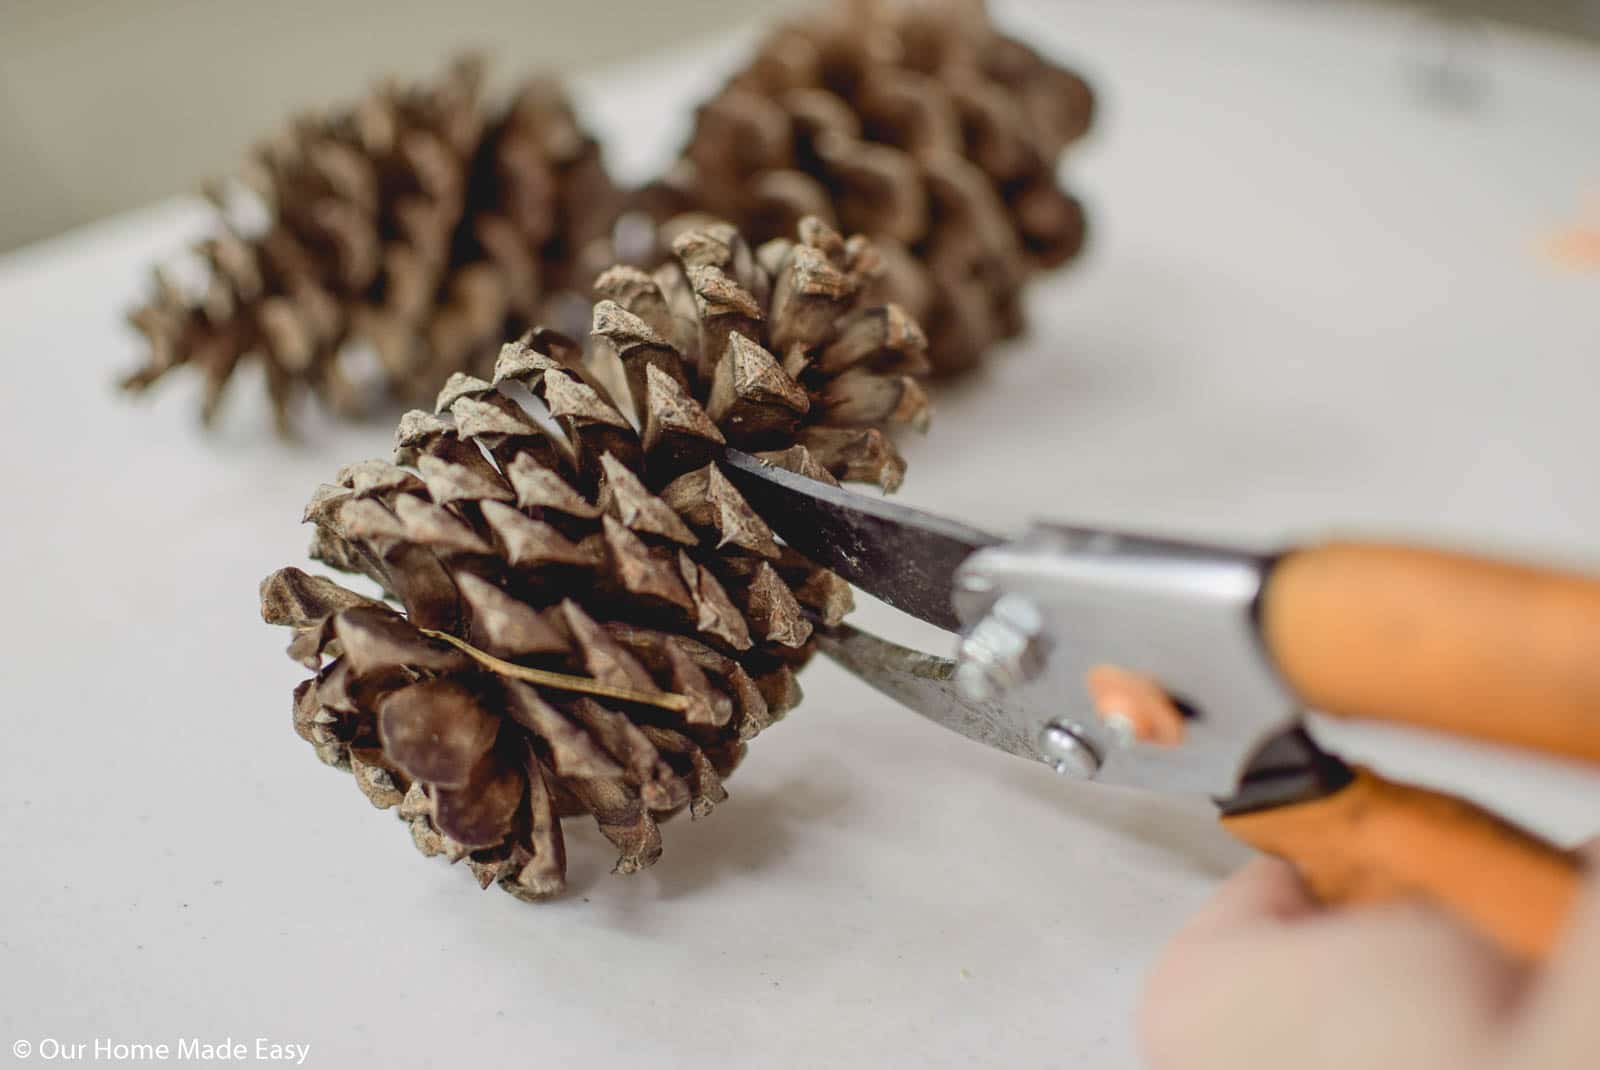 Use an industrial crafting scissors to cut the pine cones into slices